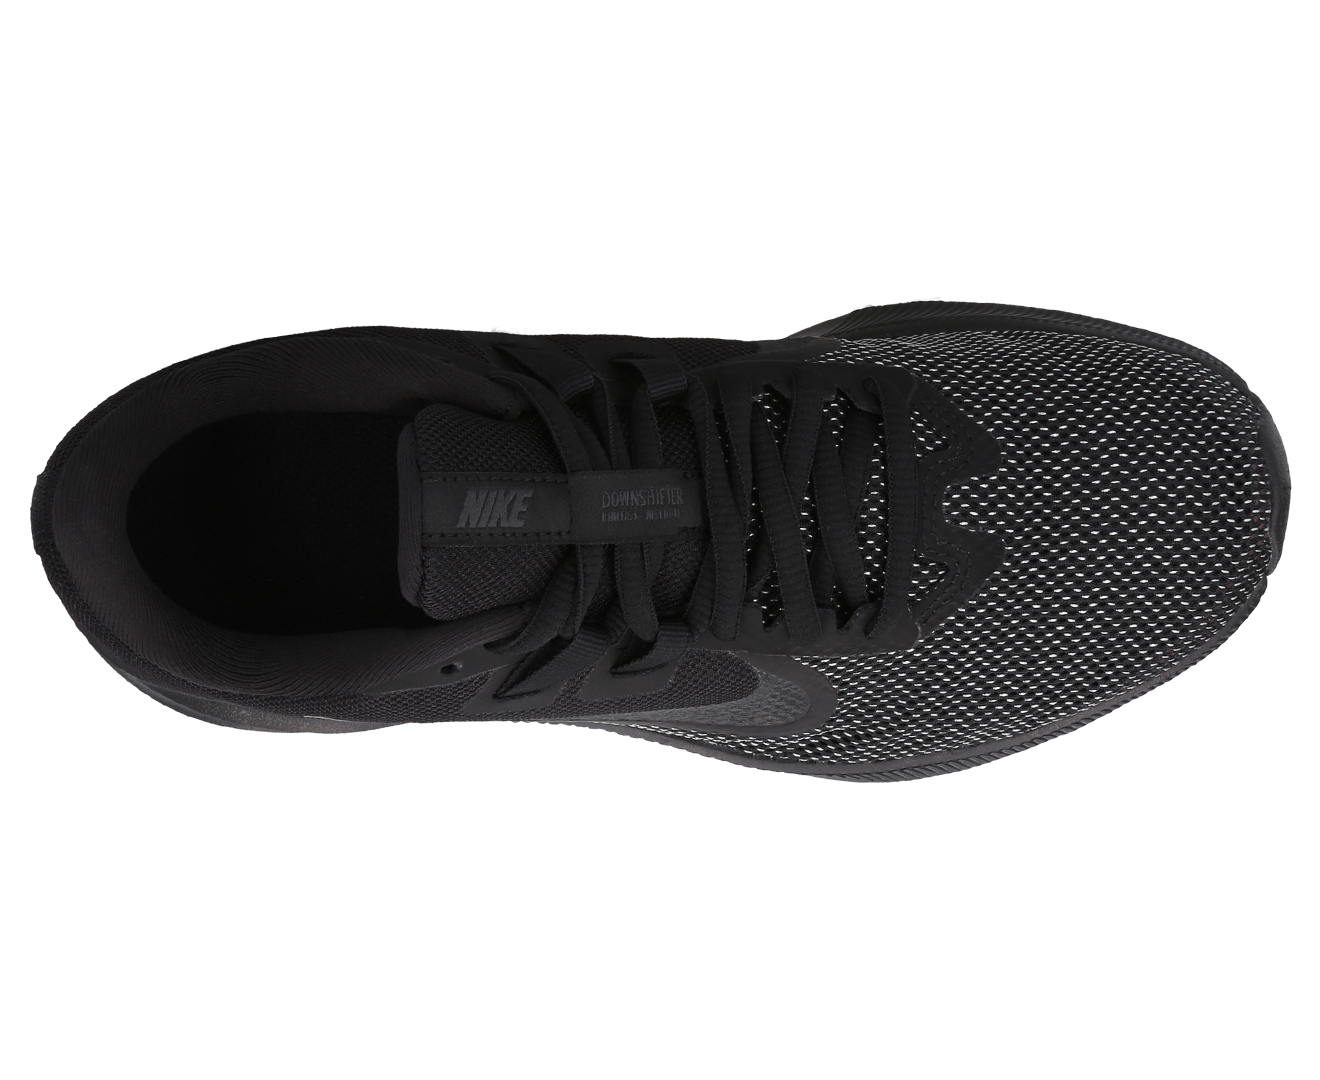 Nike Women's Downshifter 9 Running Shoes - Black/Anthracite | Catch.co.nz